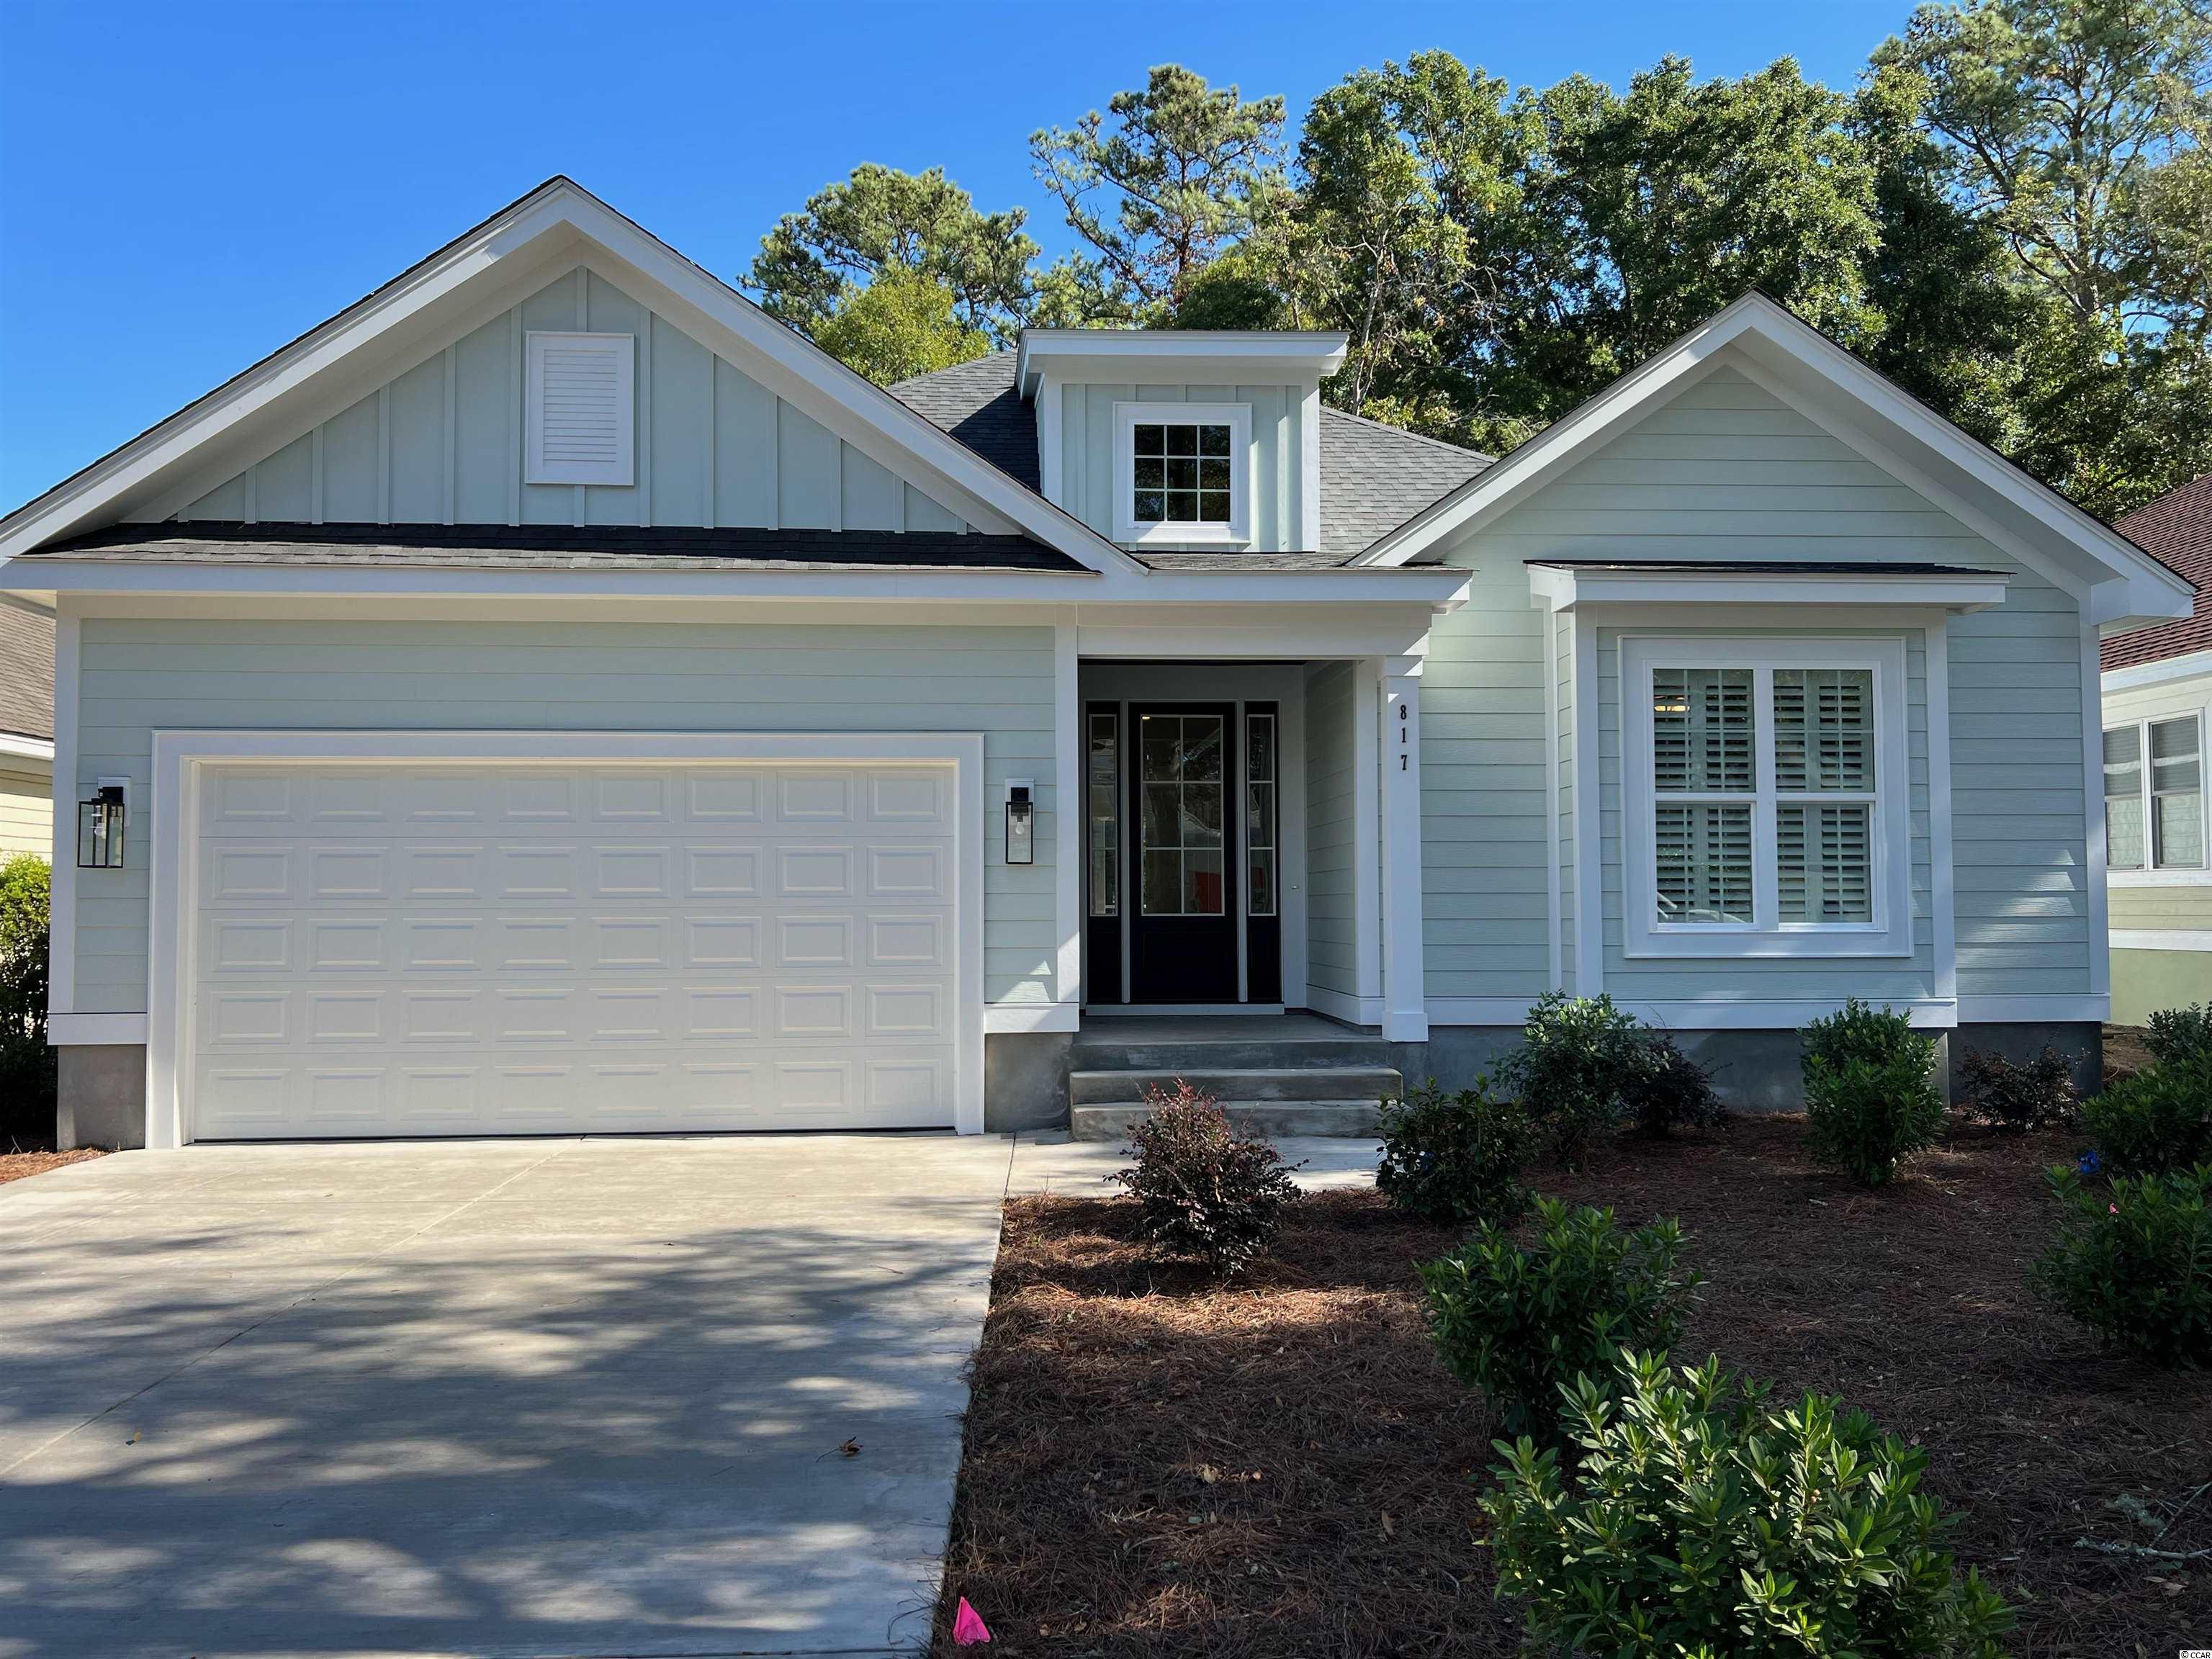 817 Morrall Dr. North Myrtle Beach, SC 29582